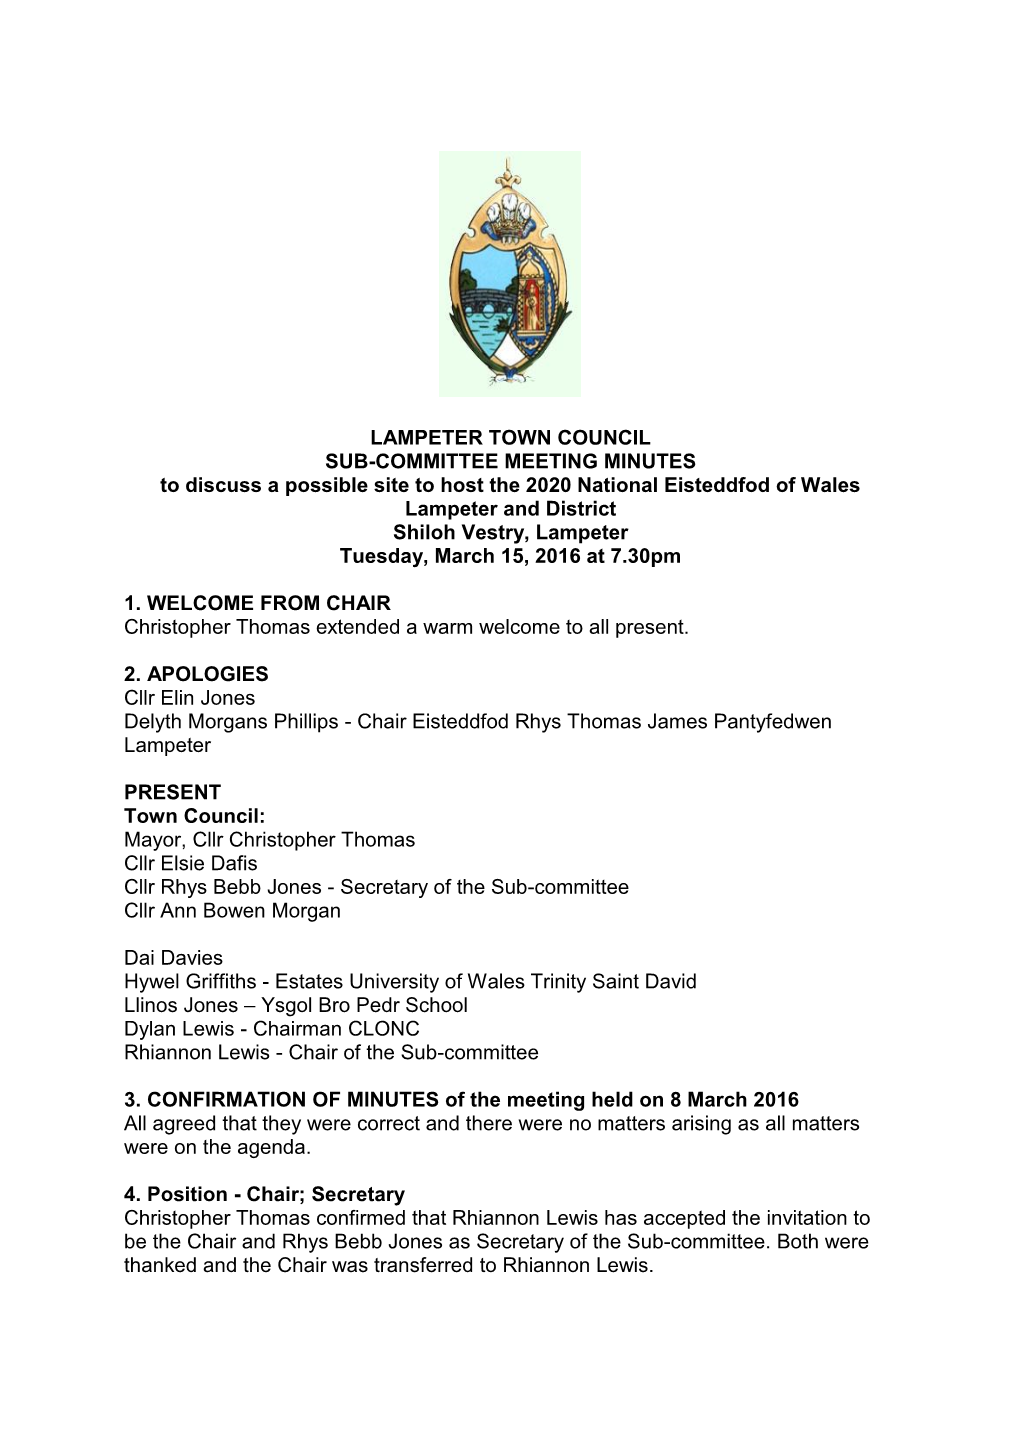 Lampeter Town Council Sub-Committee Meeting